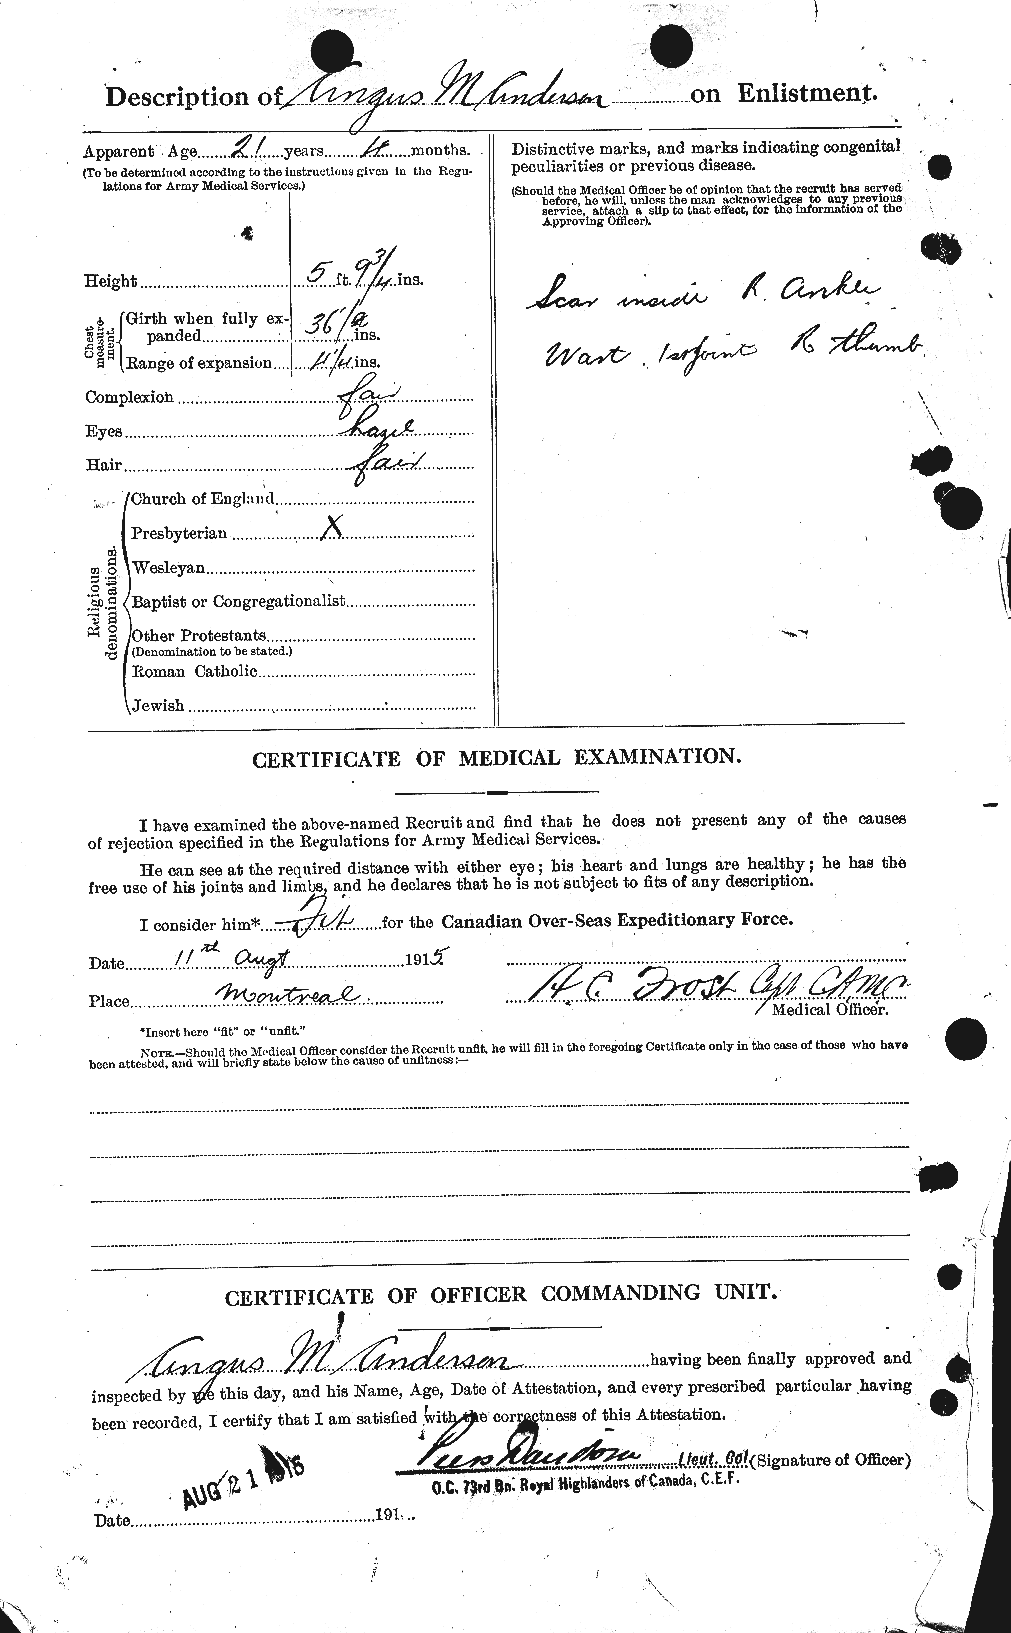 Personnel Records of the First World War - CEF 209389b